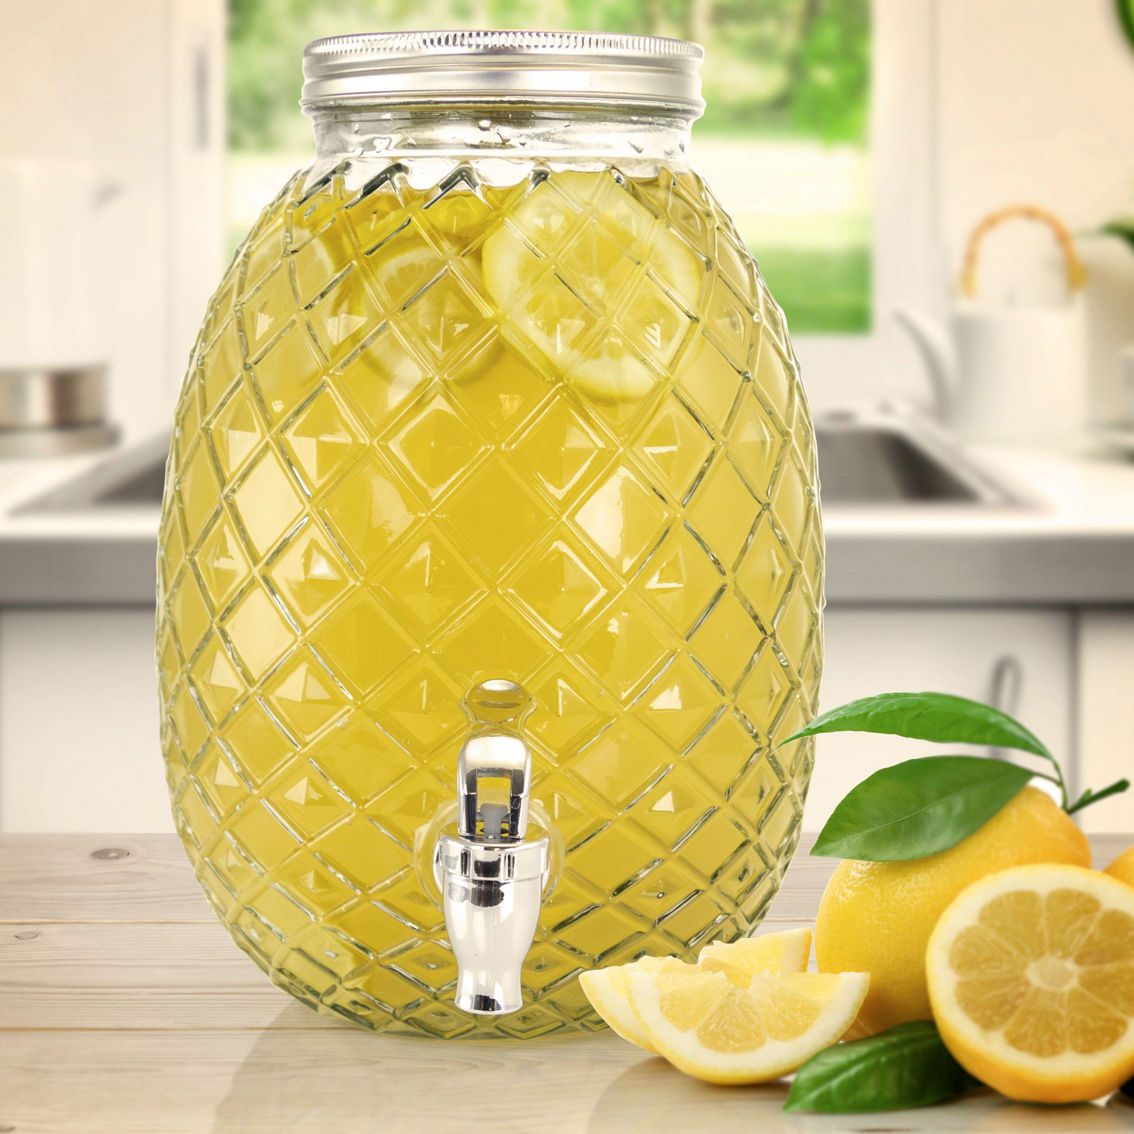 Gibson Home 1.2 Gallon Pineapple Clear Glass Drink Dispenser - Image 5 of 5